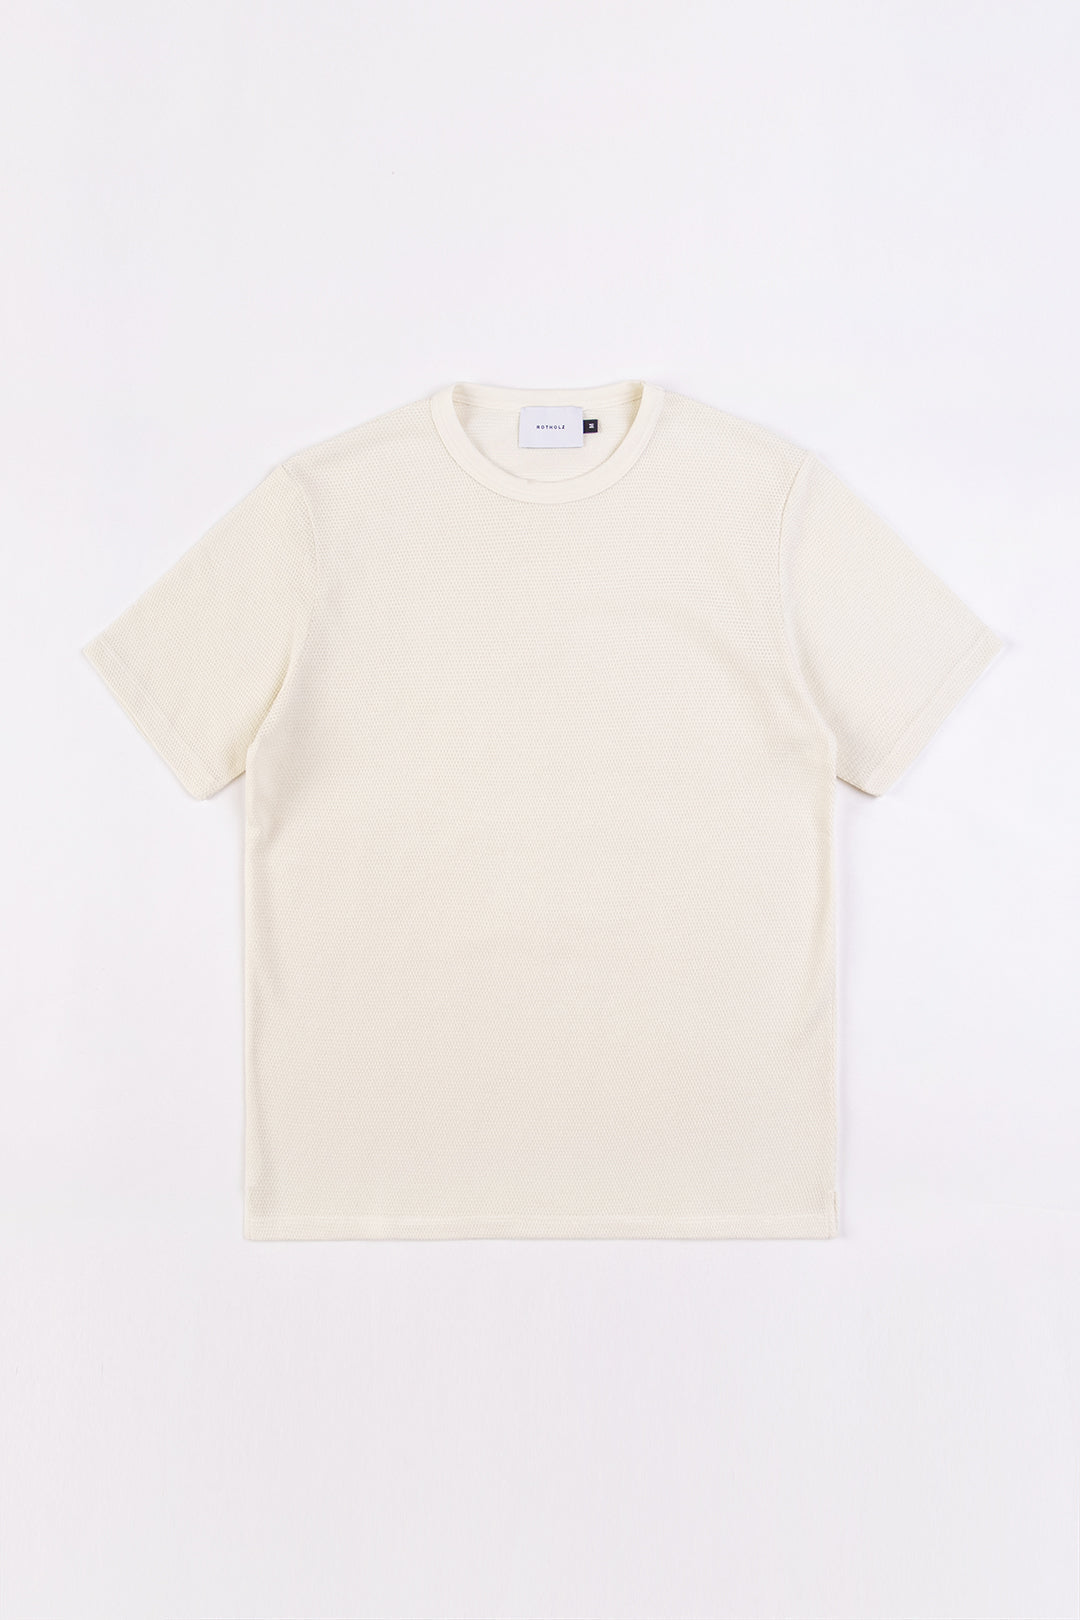 White T-shirt made from 100% organic cotton from Rotholz